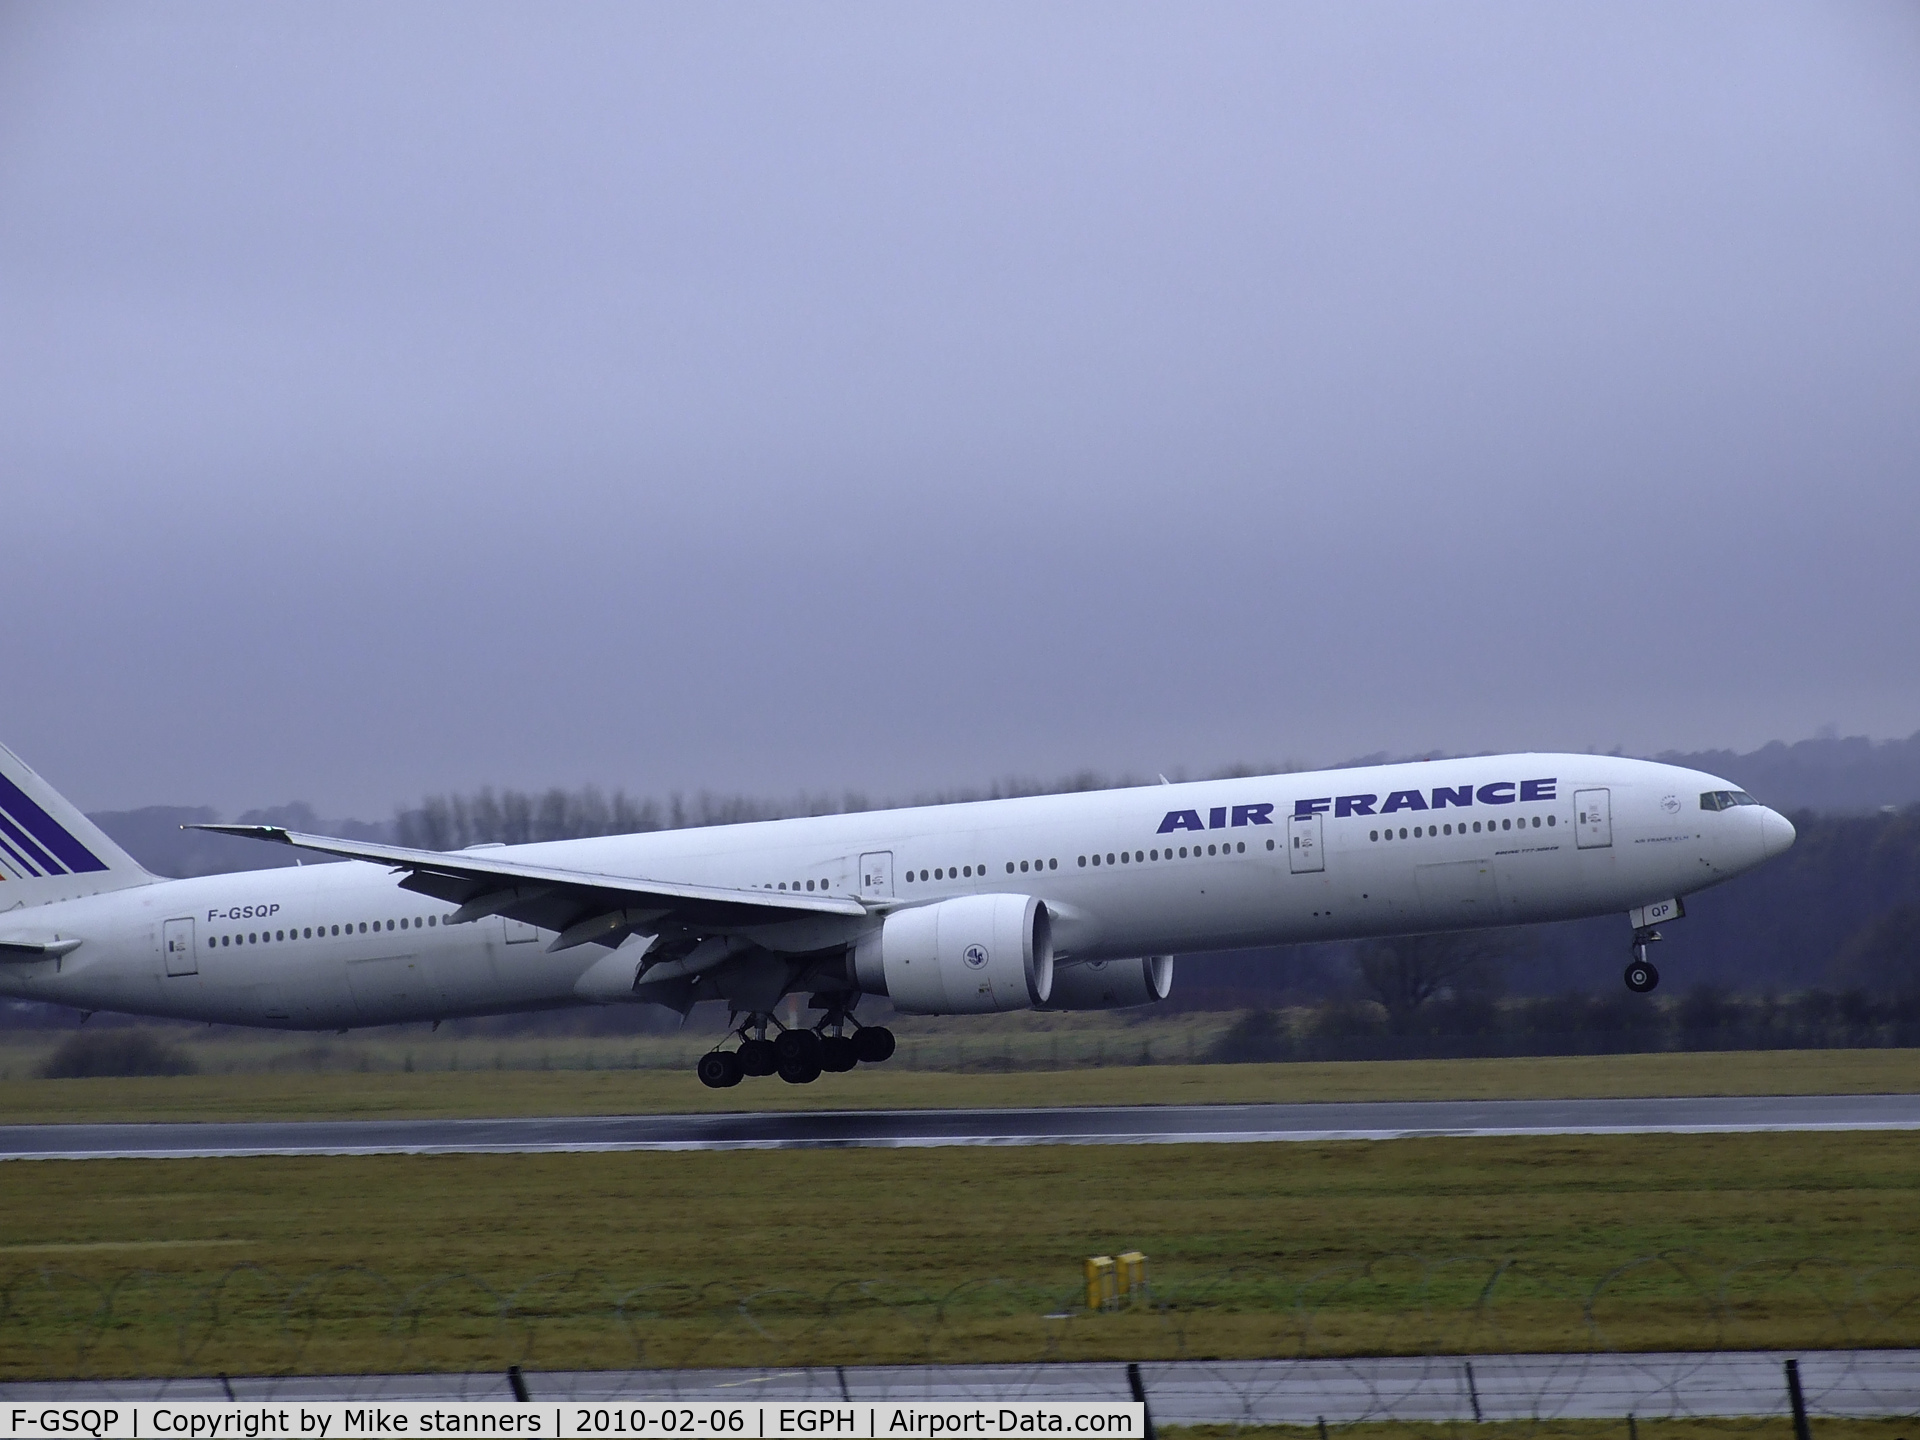 F-GSQP, 2006 Boeing 777-328/ER C/N 35676, AFR B773 Seconds before touching down on runway 06 at EDI